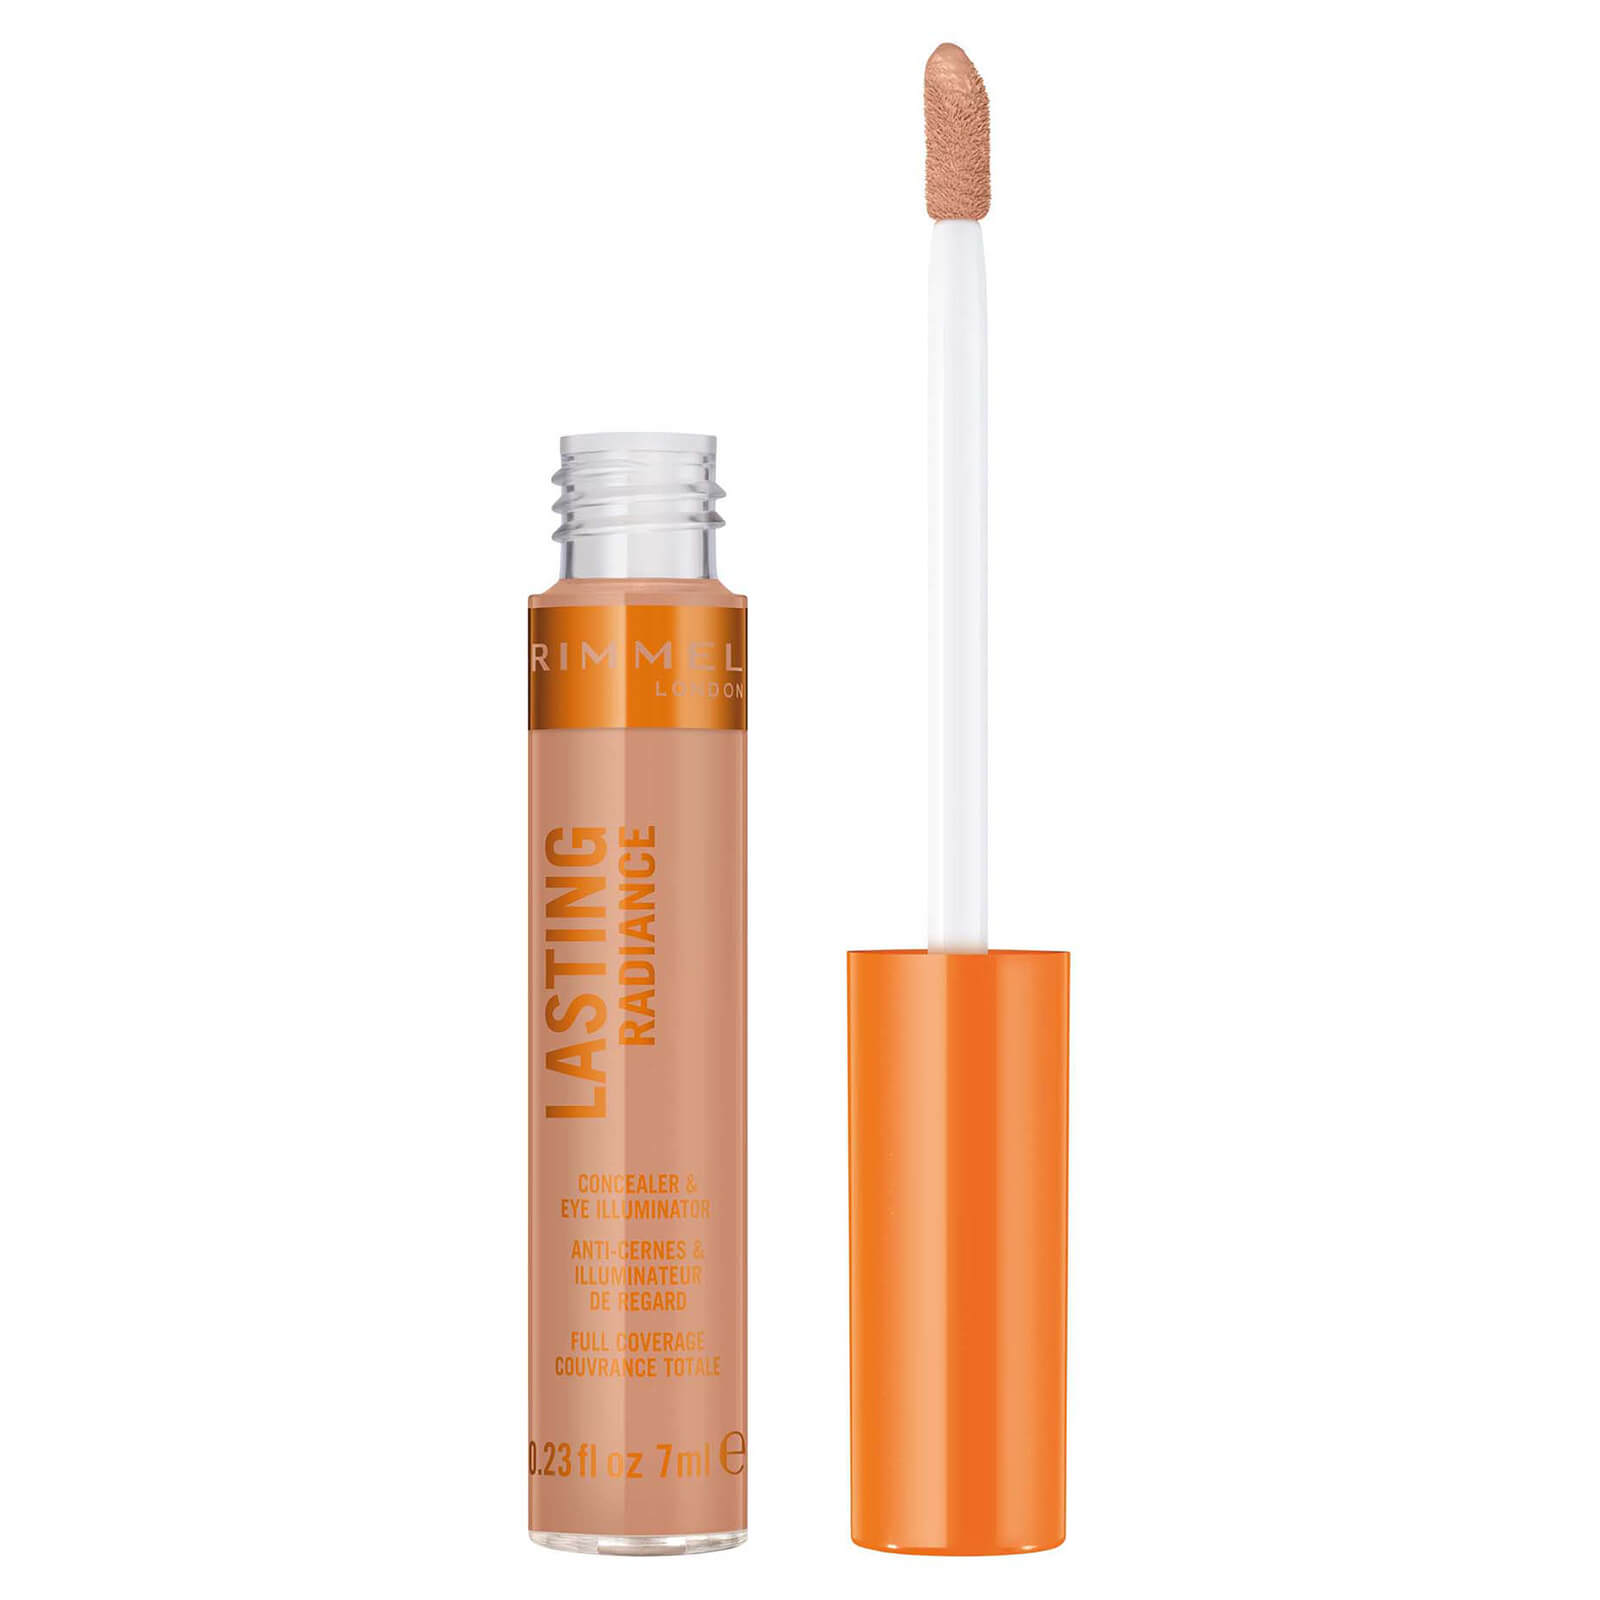 rimmel lasting radiance concealer (various shades) - fawn